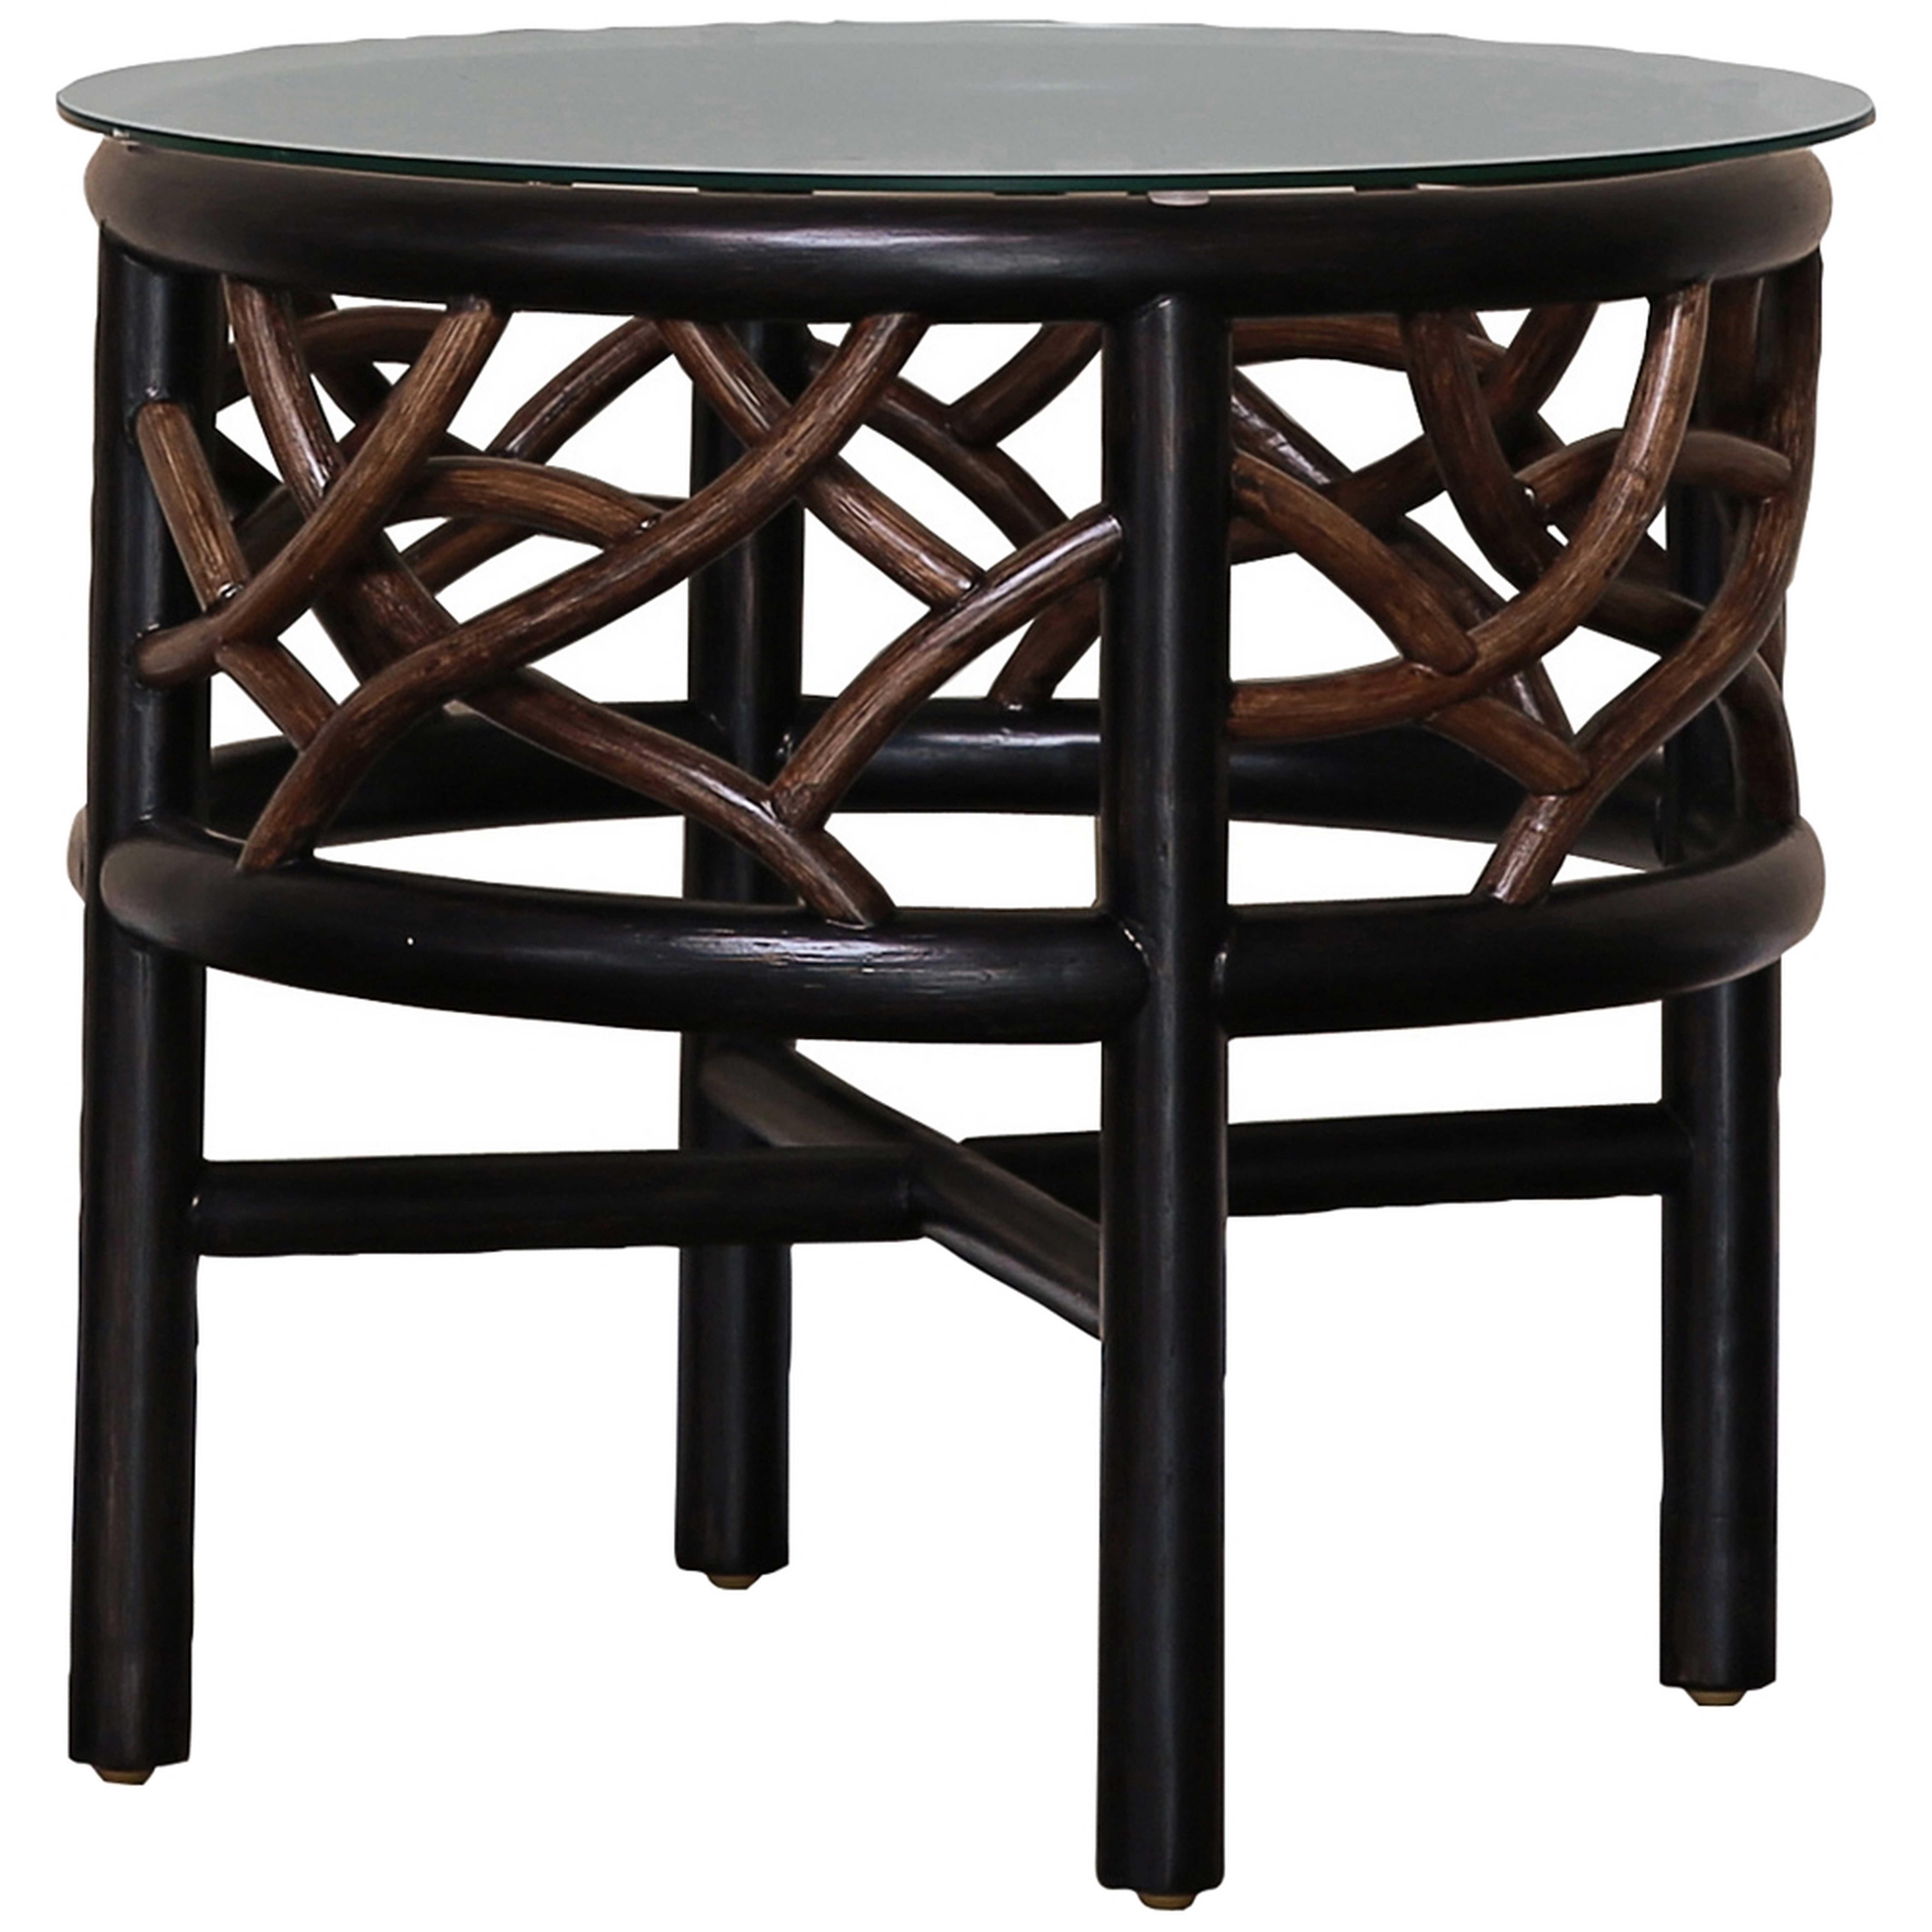 Panama Jack Trinidad 22" Wide Black and Tan Rattan End Table - Style # 69N06 - Lamps Plus